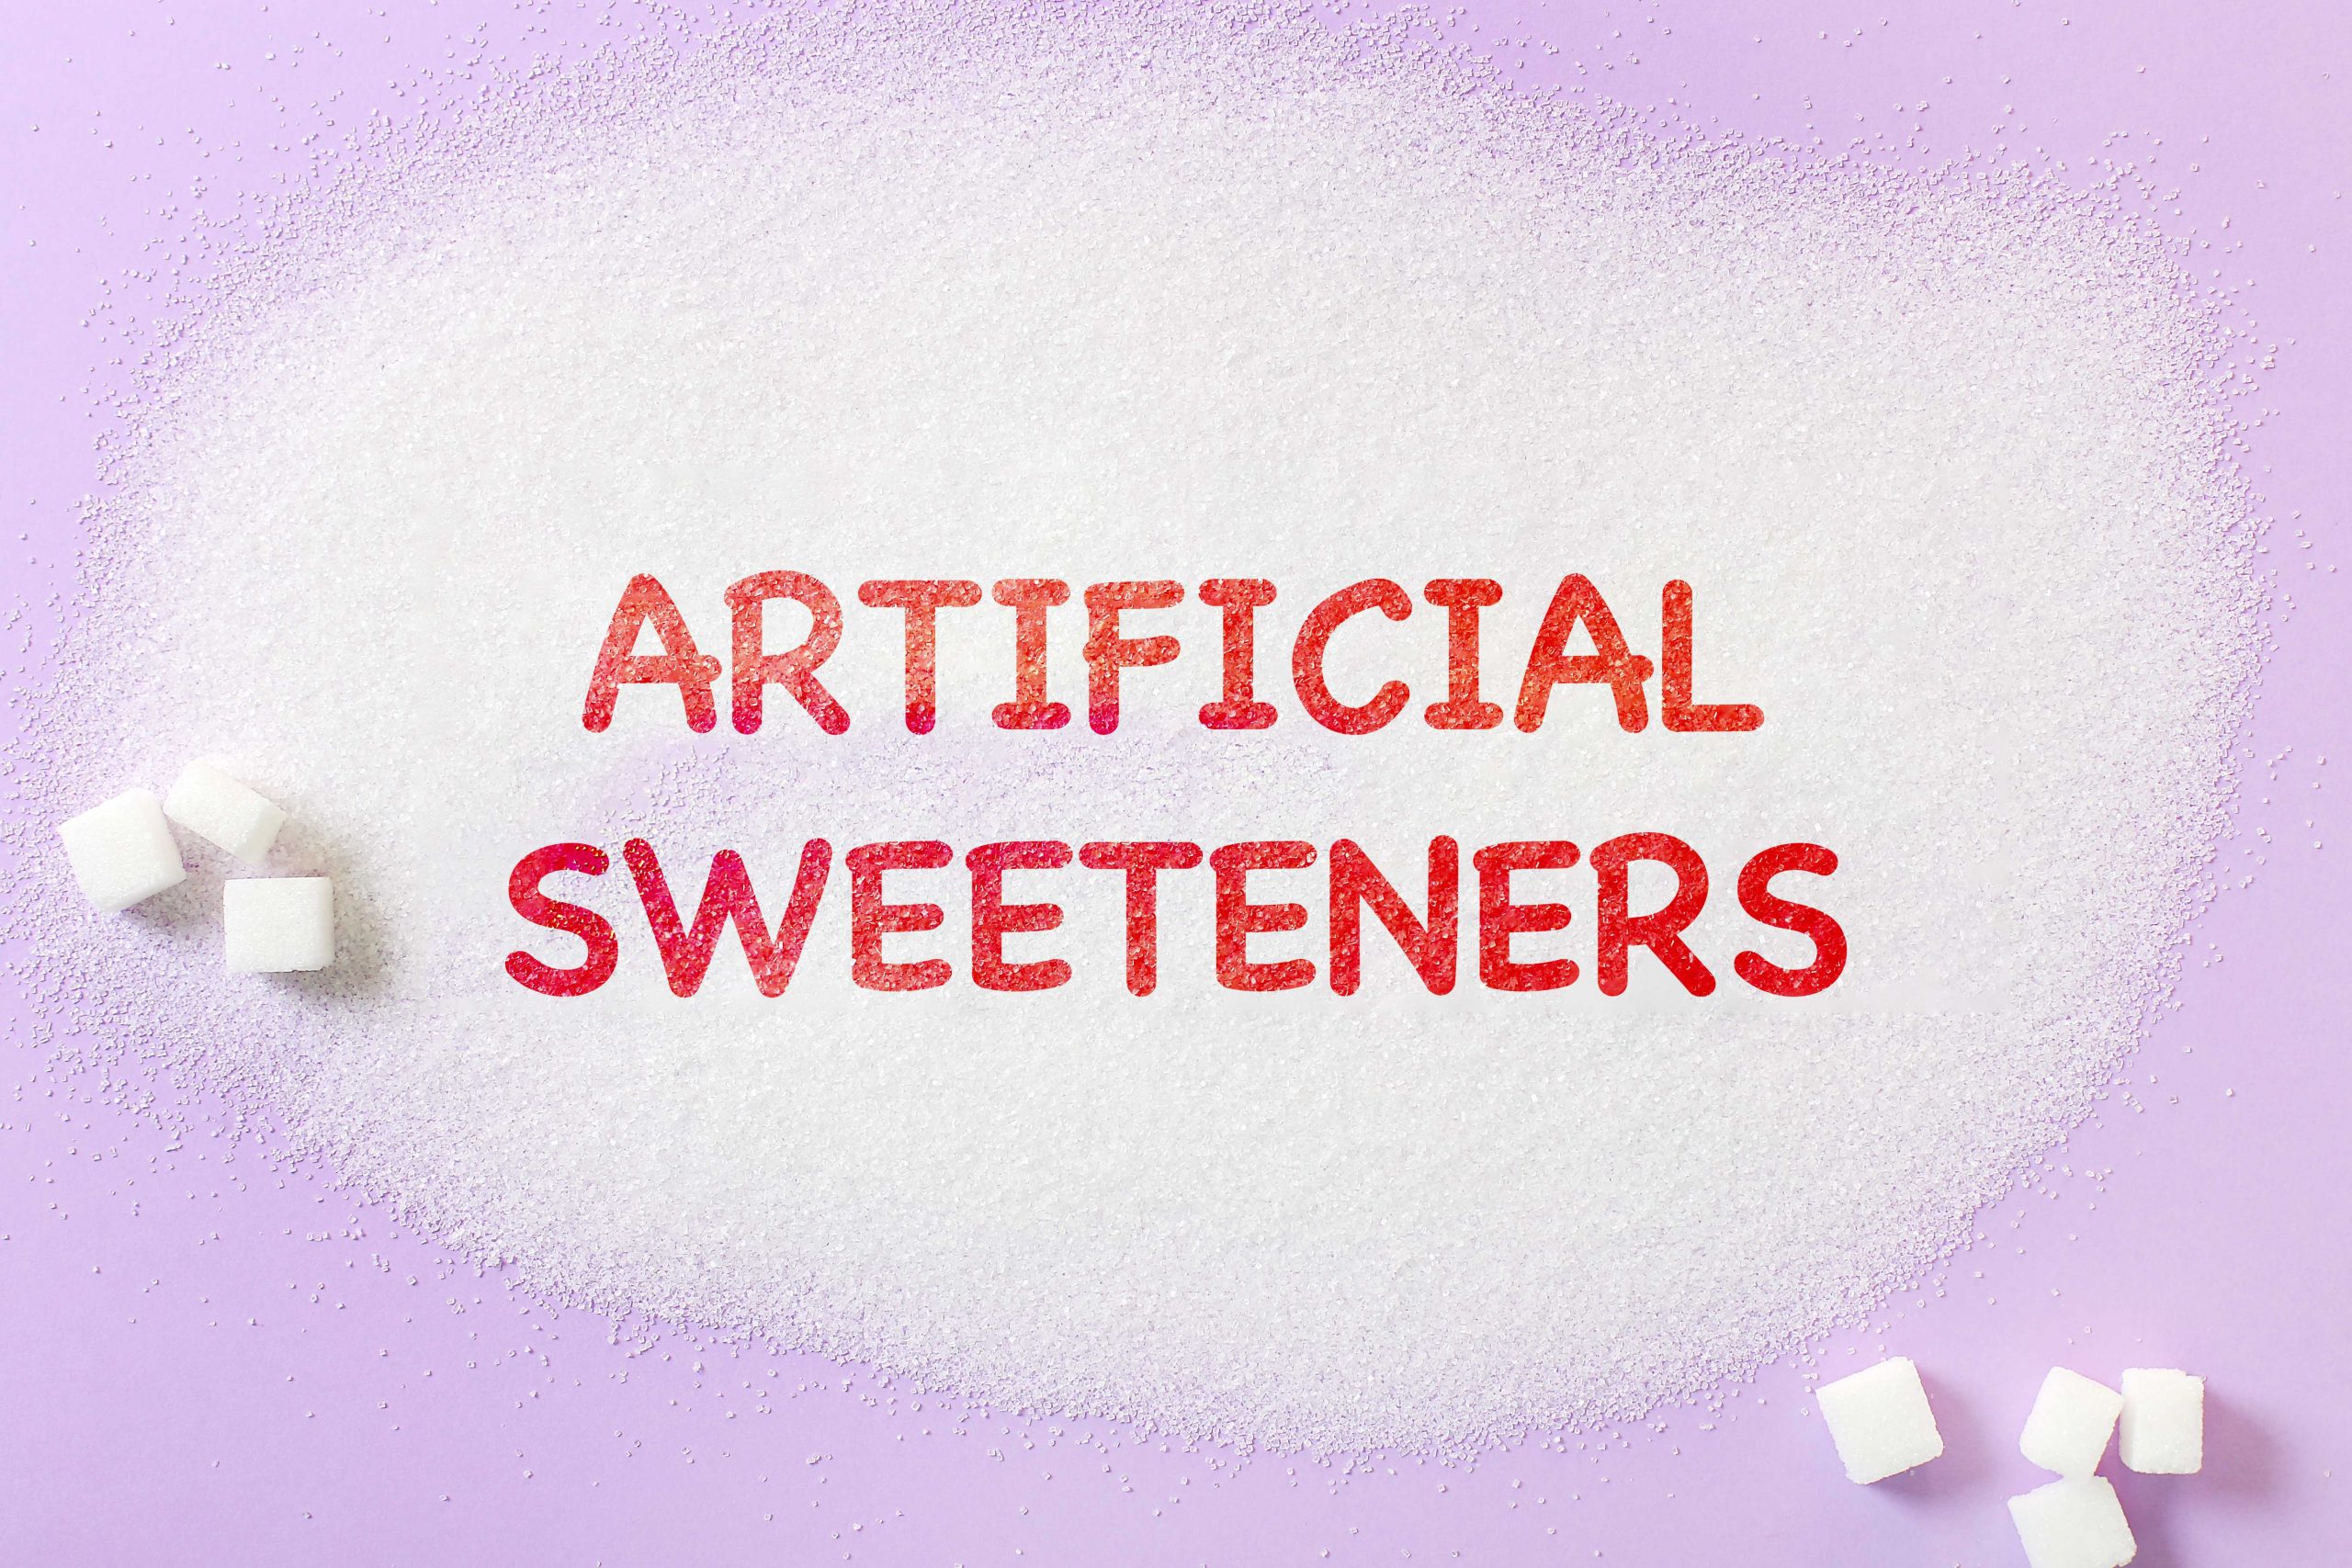 Are Artificial sweeteners safe